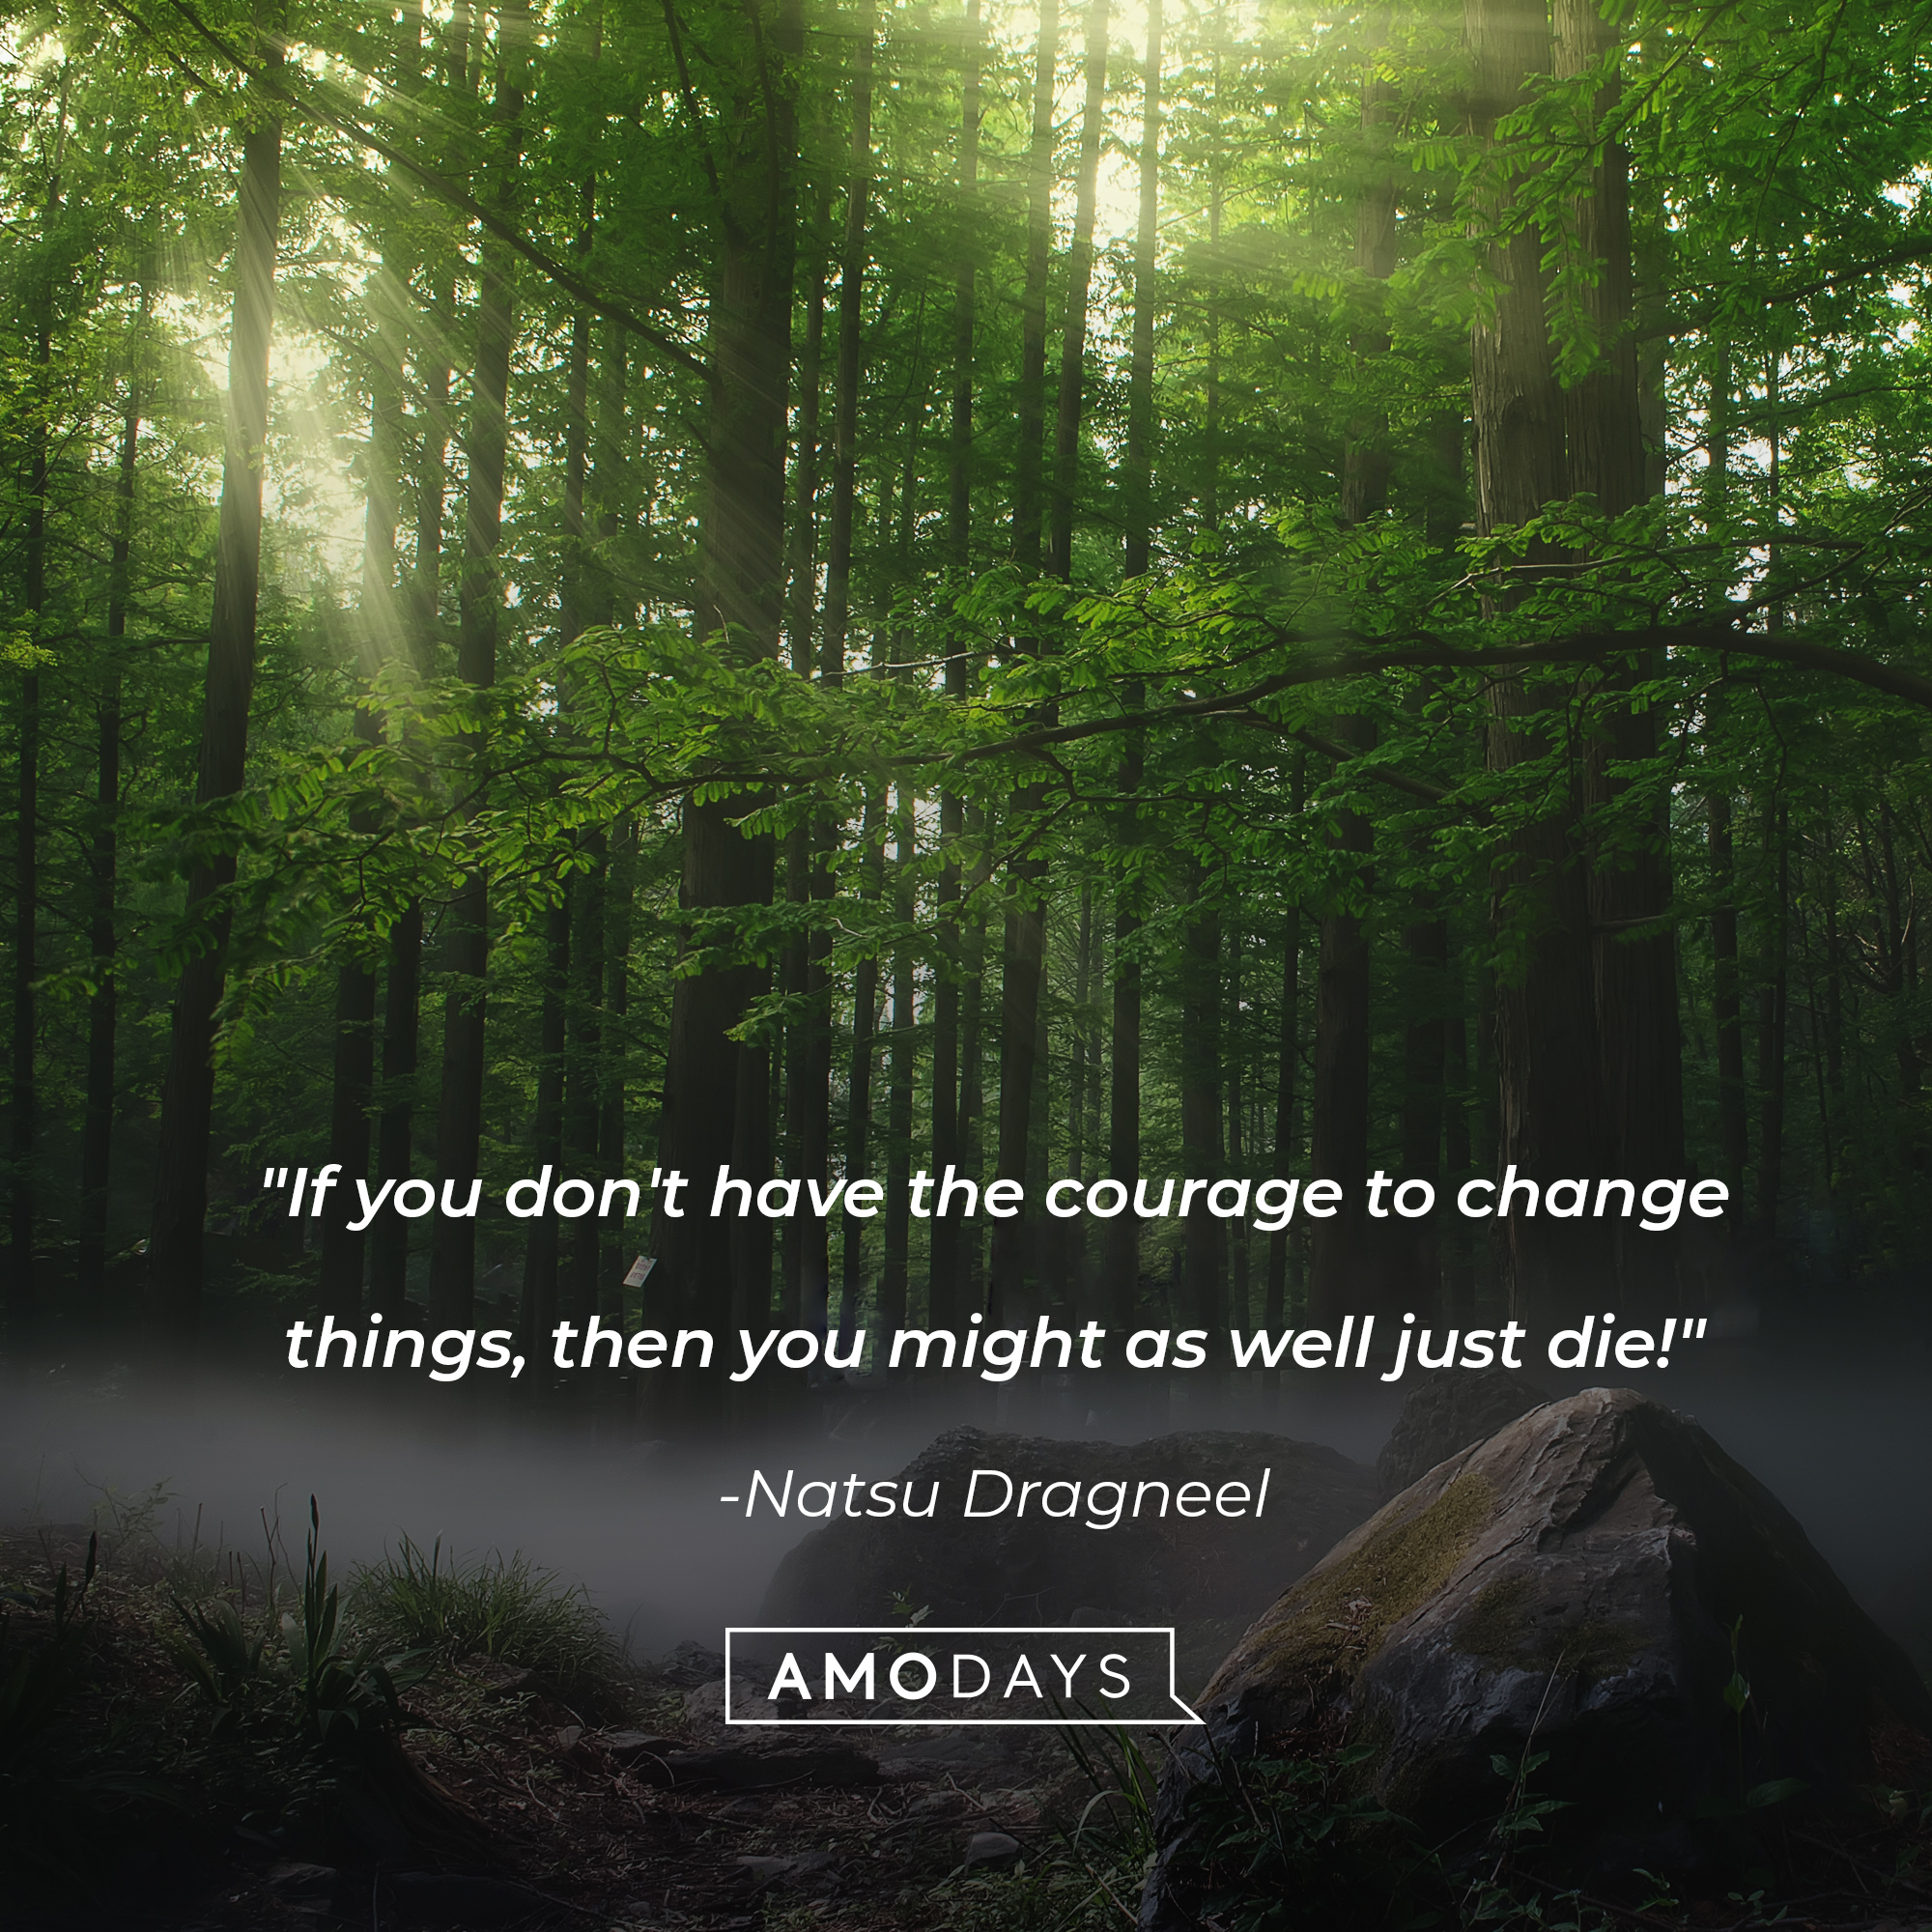 Natsu Dragneel's quote: "If you don't have the courage to change things, then you might as well just die!" | Image: Unsplash